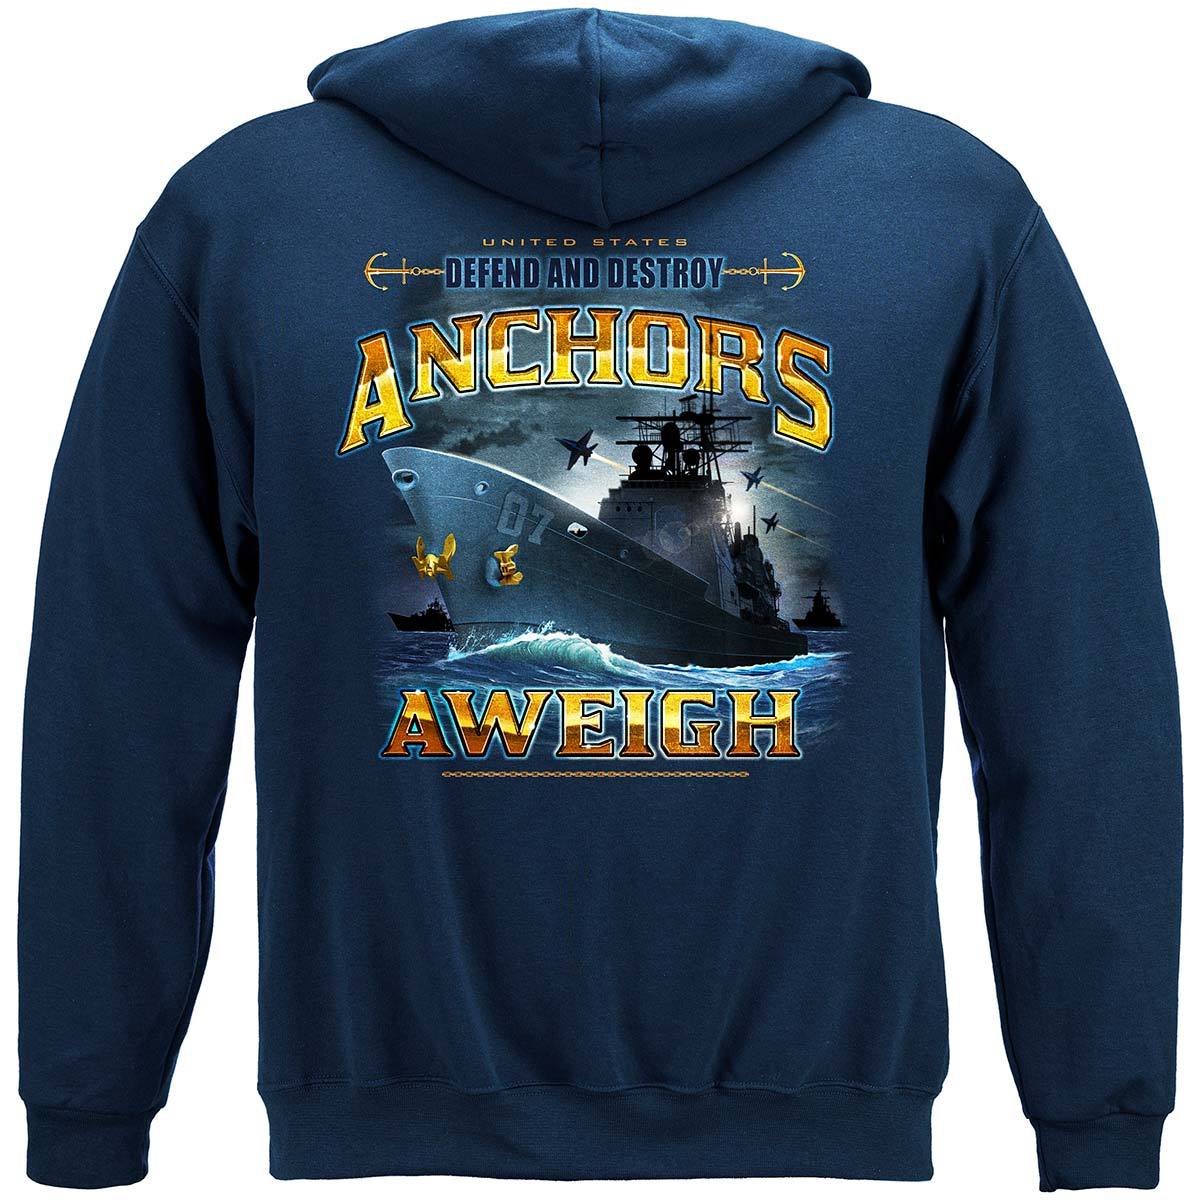 US NAVY Anchors Aweigh Defend And Destroy Premium T-Shirt